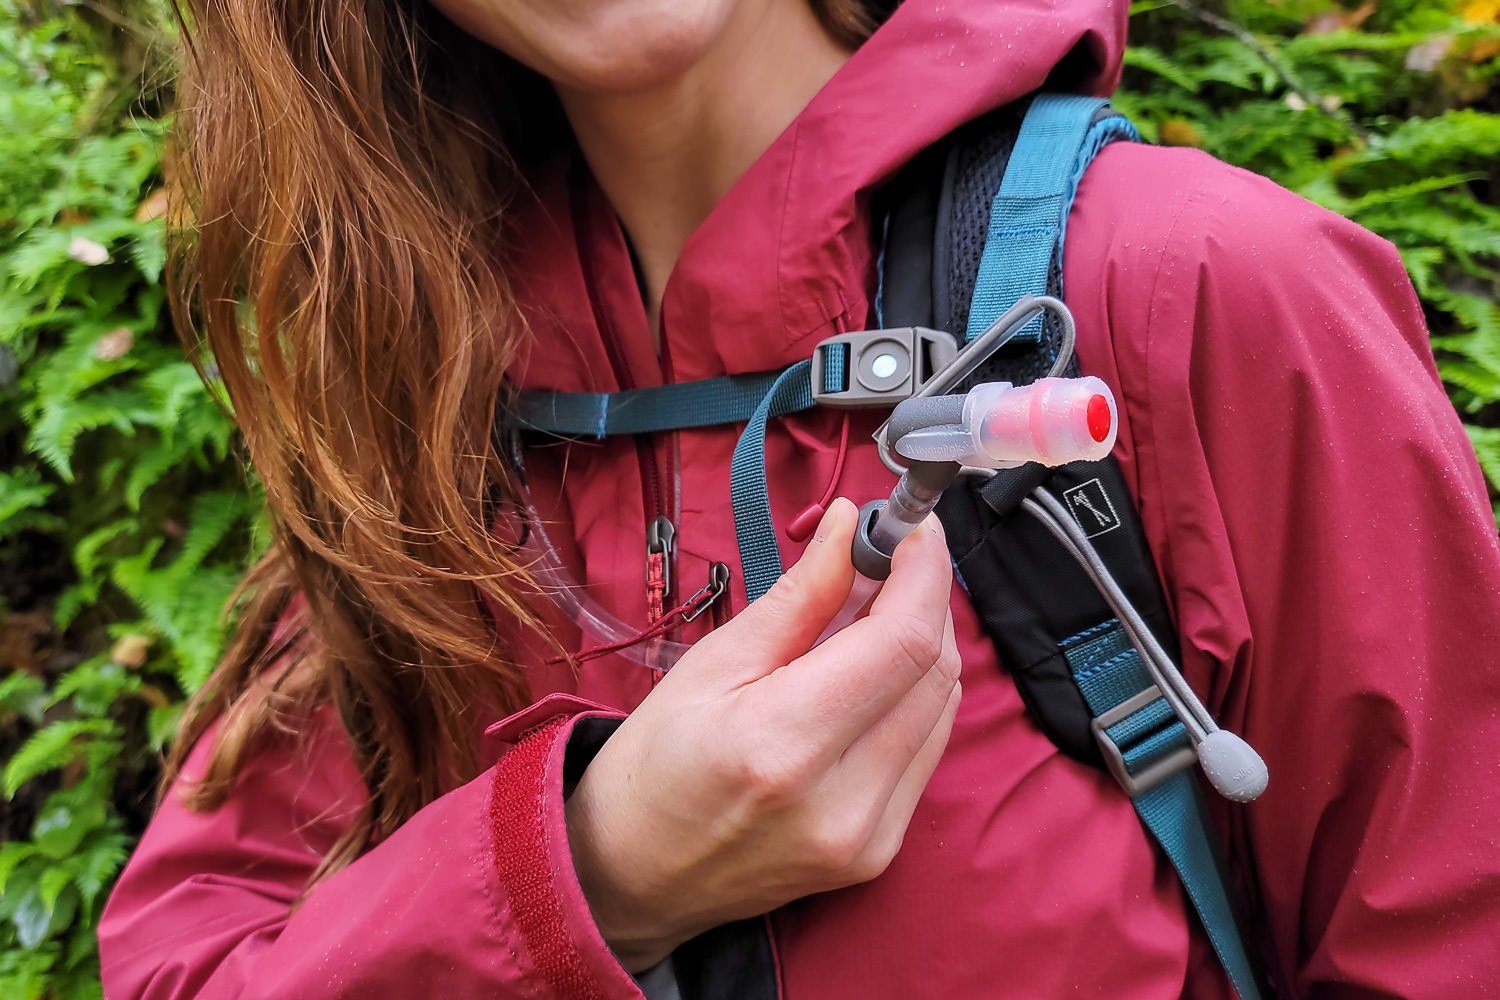 Closeup of the bite valve and magnetic sternum strap on the Osprey Hydraulics hydration bladder